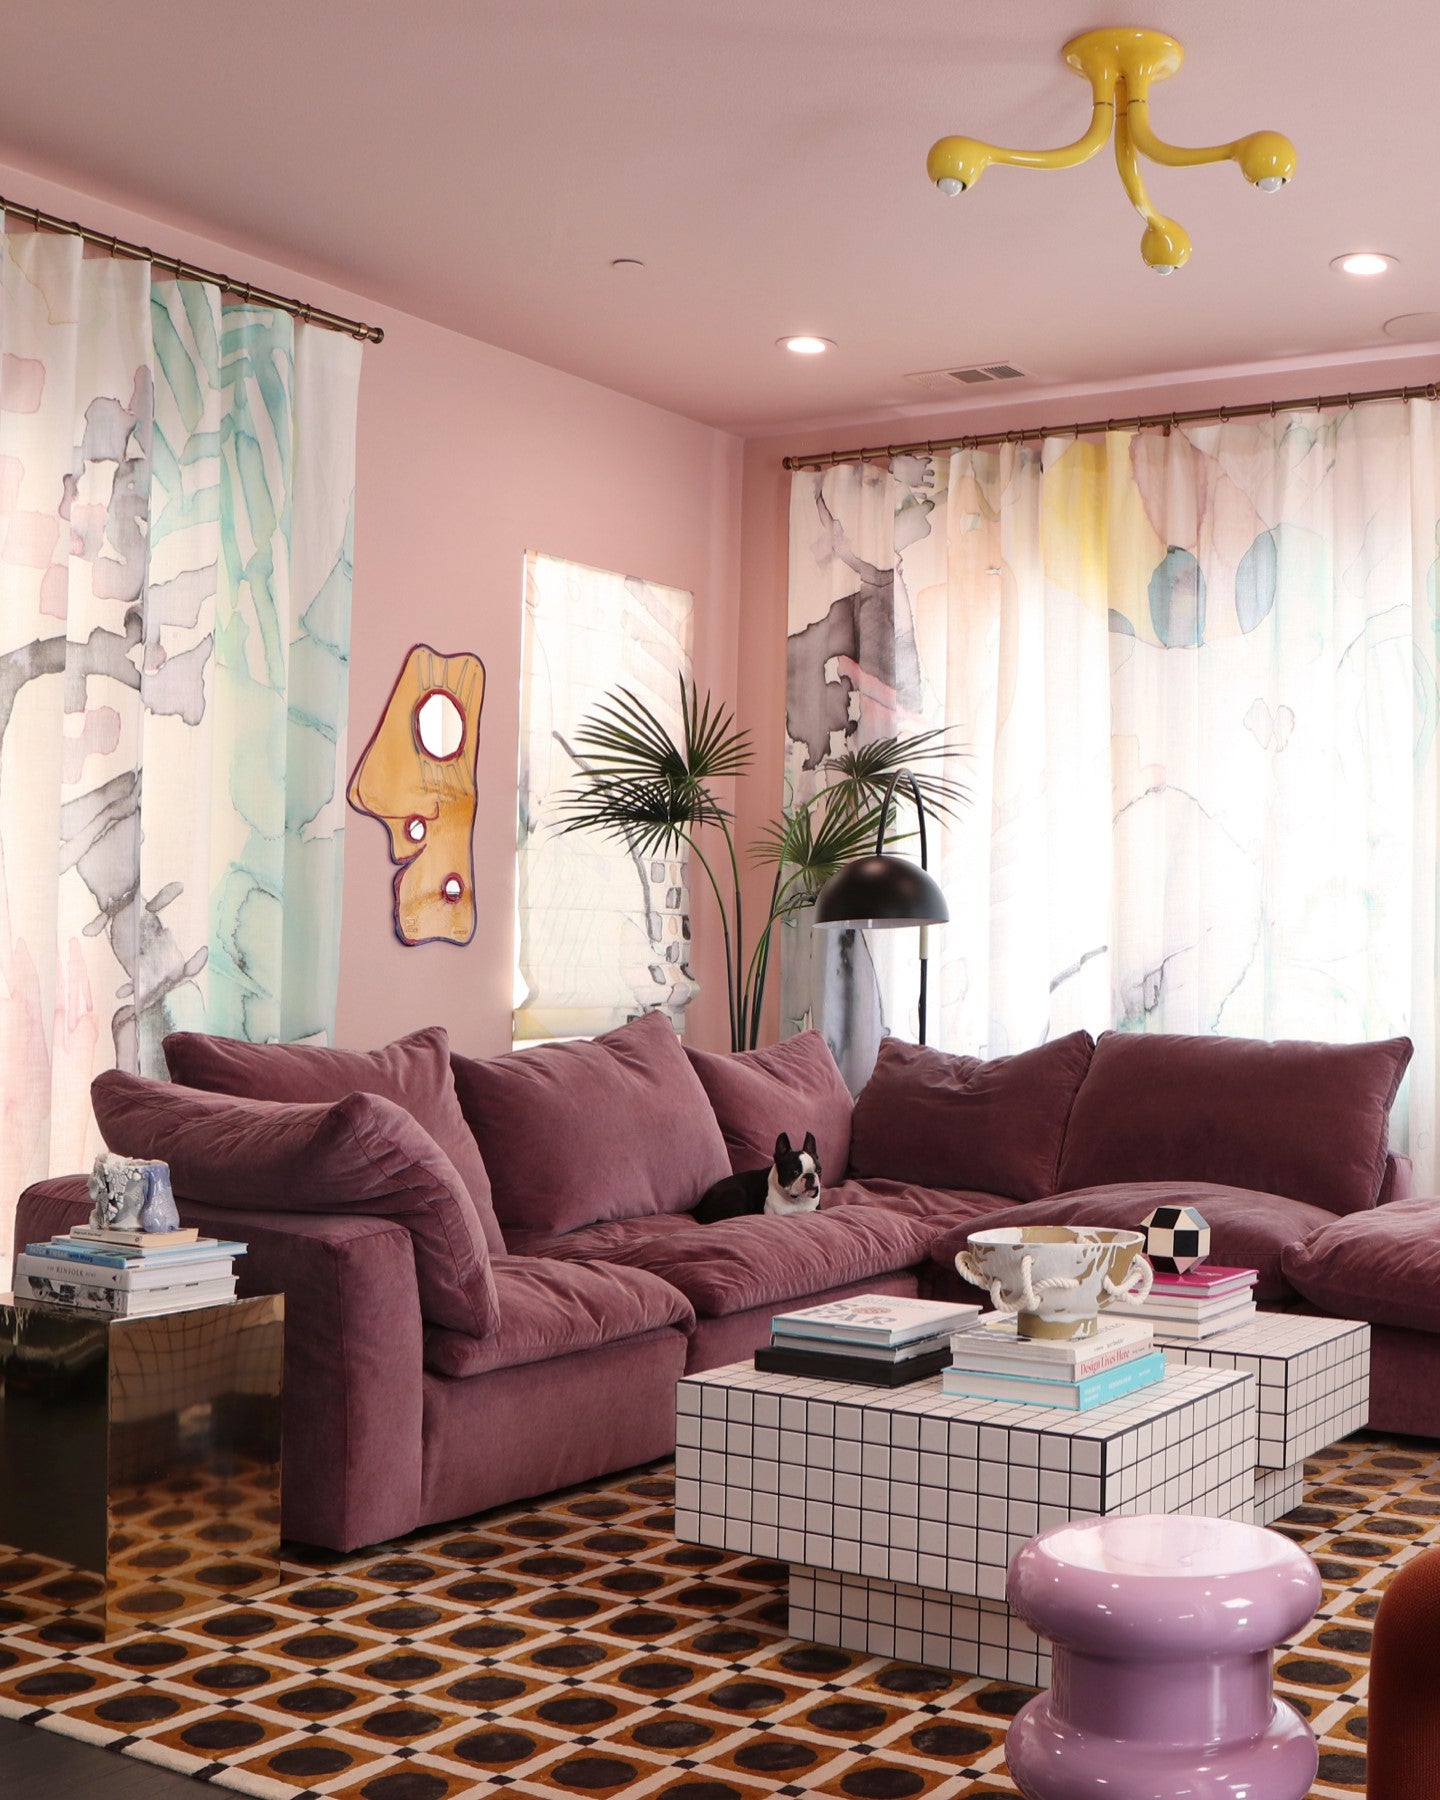 A pink couch in a living room